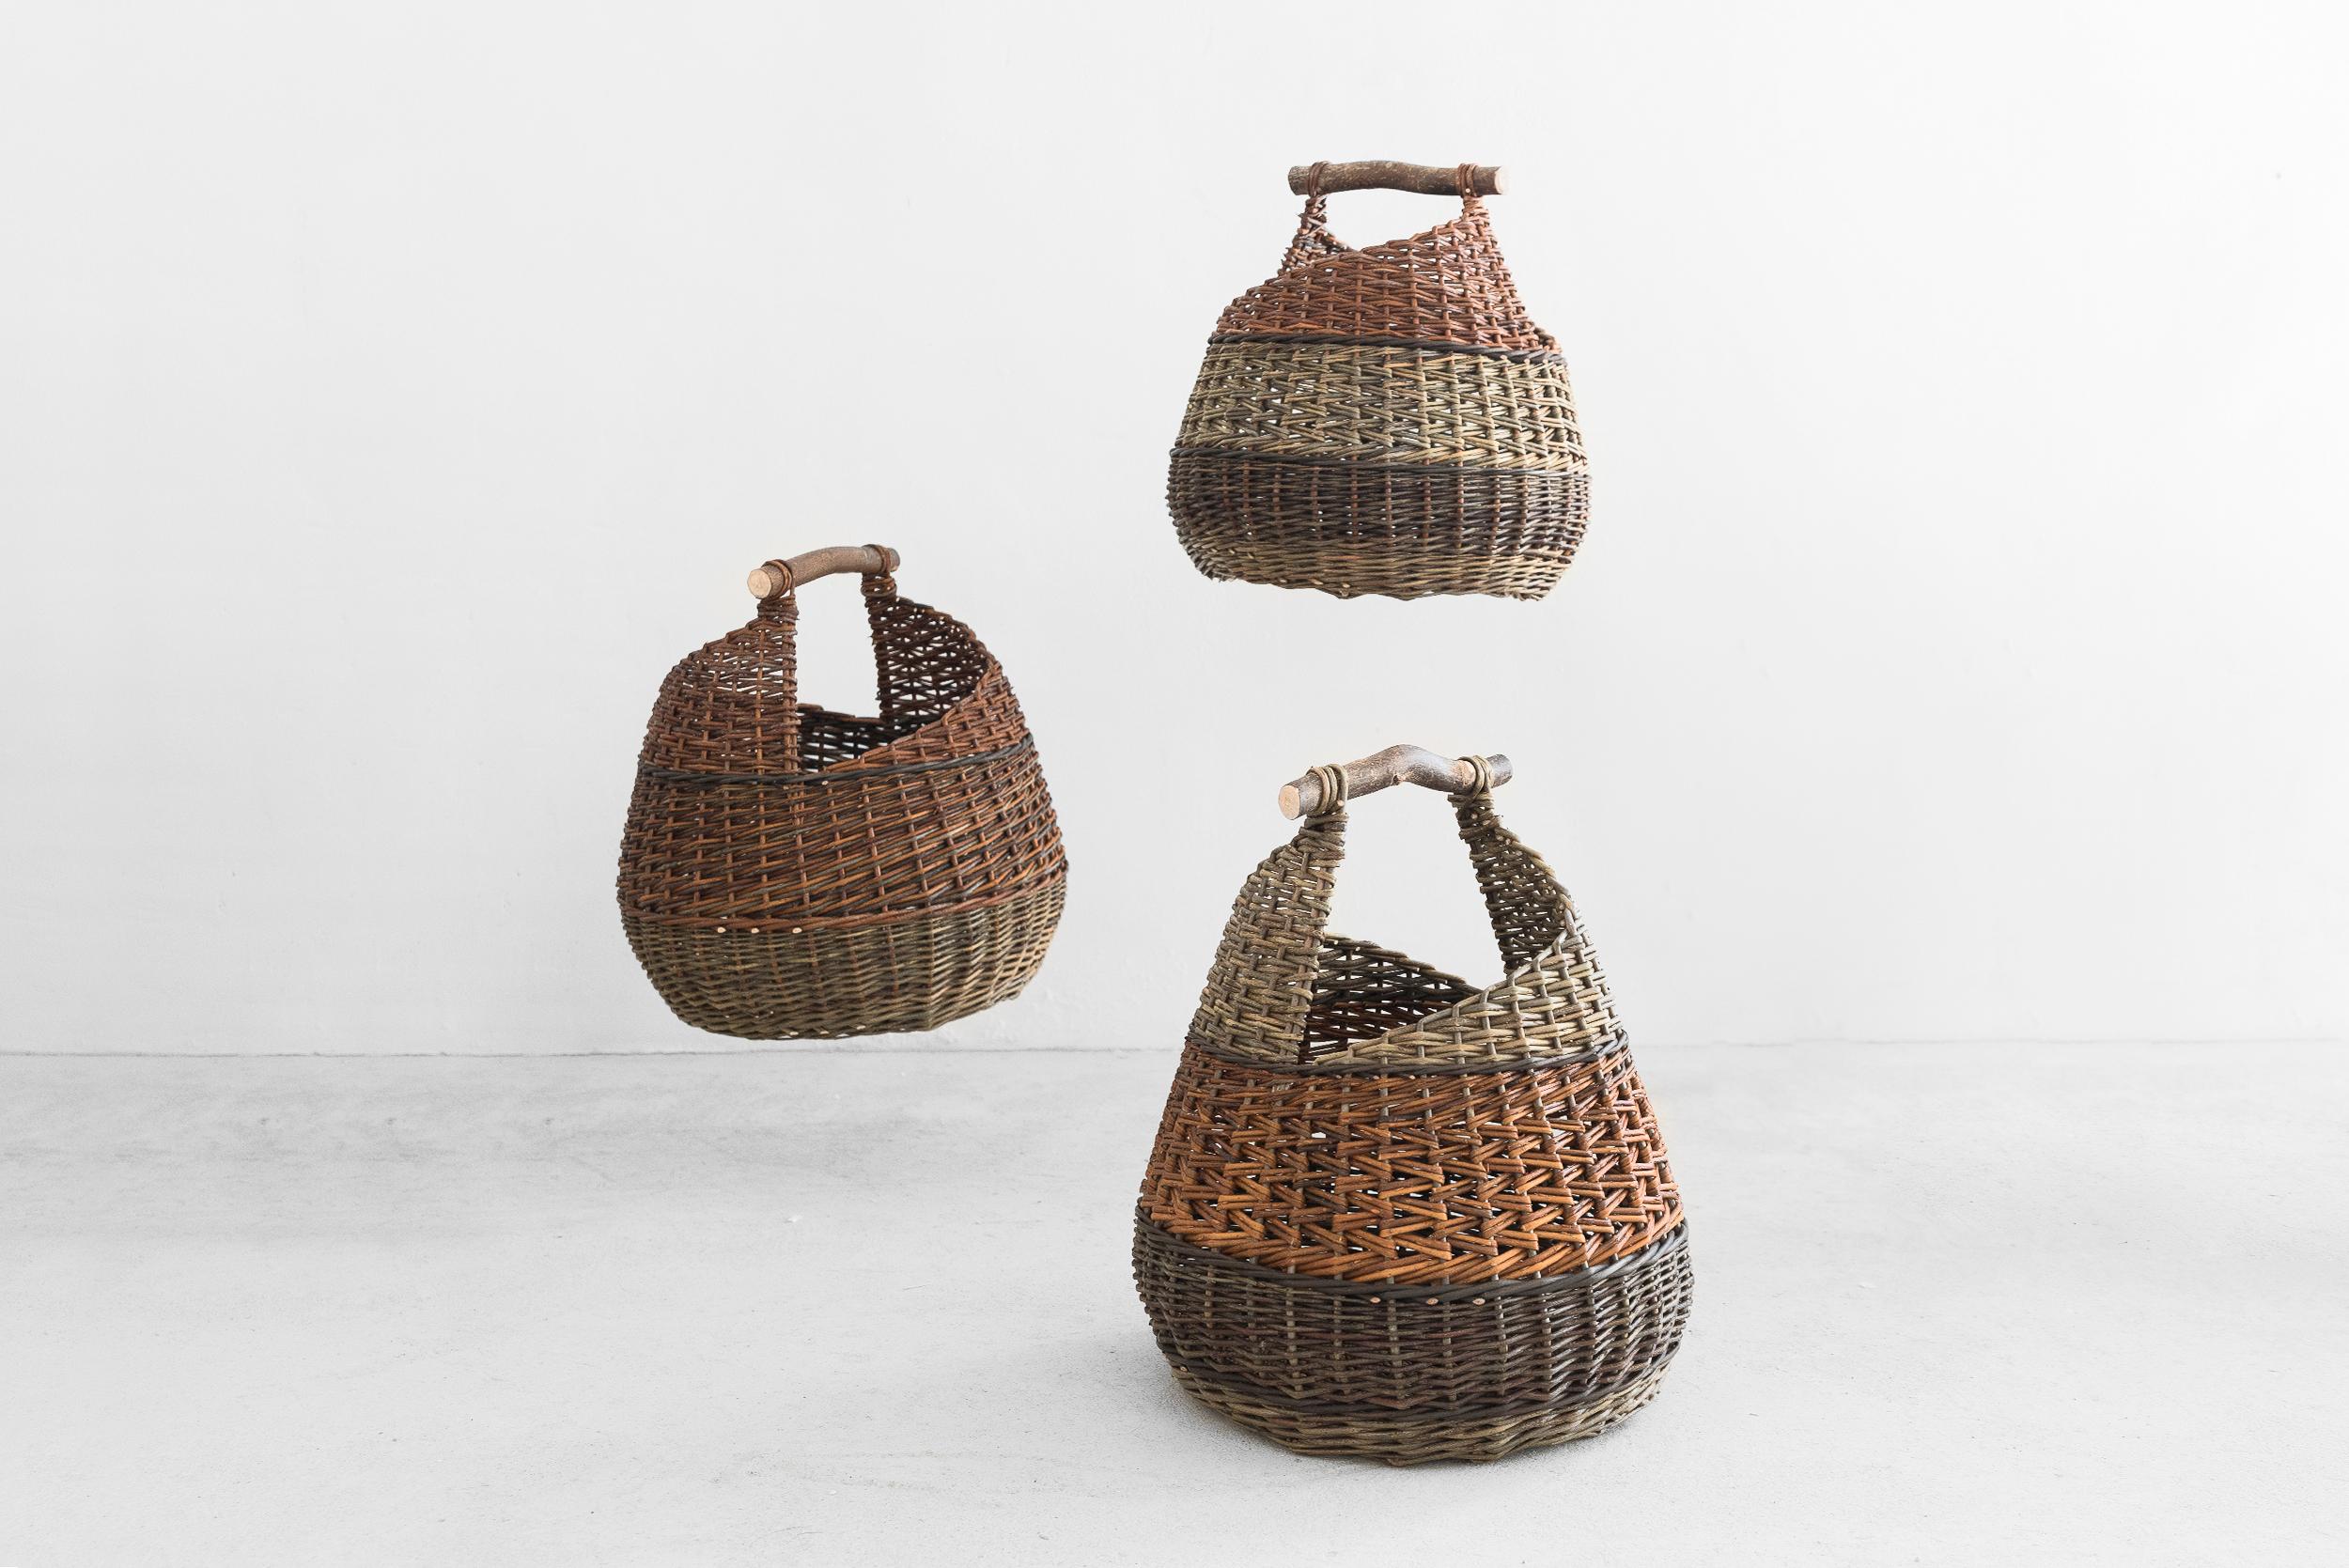 Mónica Guilera Subirana
Baskets
Manufactured by Mónica Guilera Subirana
Produced in exclusive for SIDE GALLERY
Villanova i la Geltrú (Catalonia), 2020
Willow with wooden handle

Measurements
Different measurements

Functional and